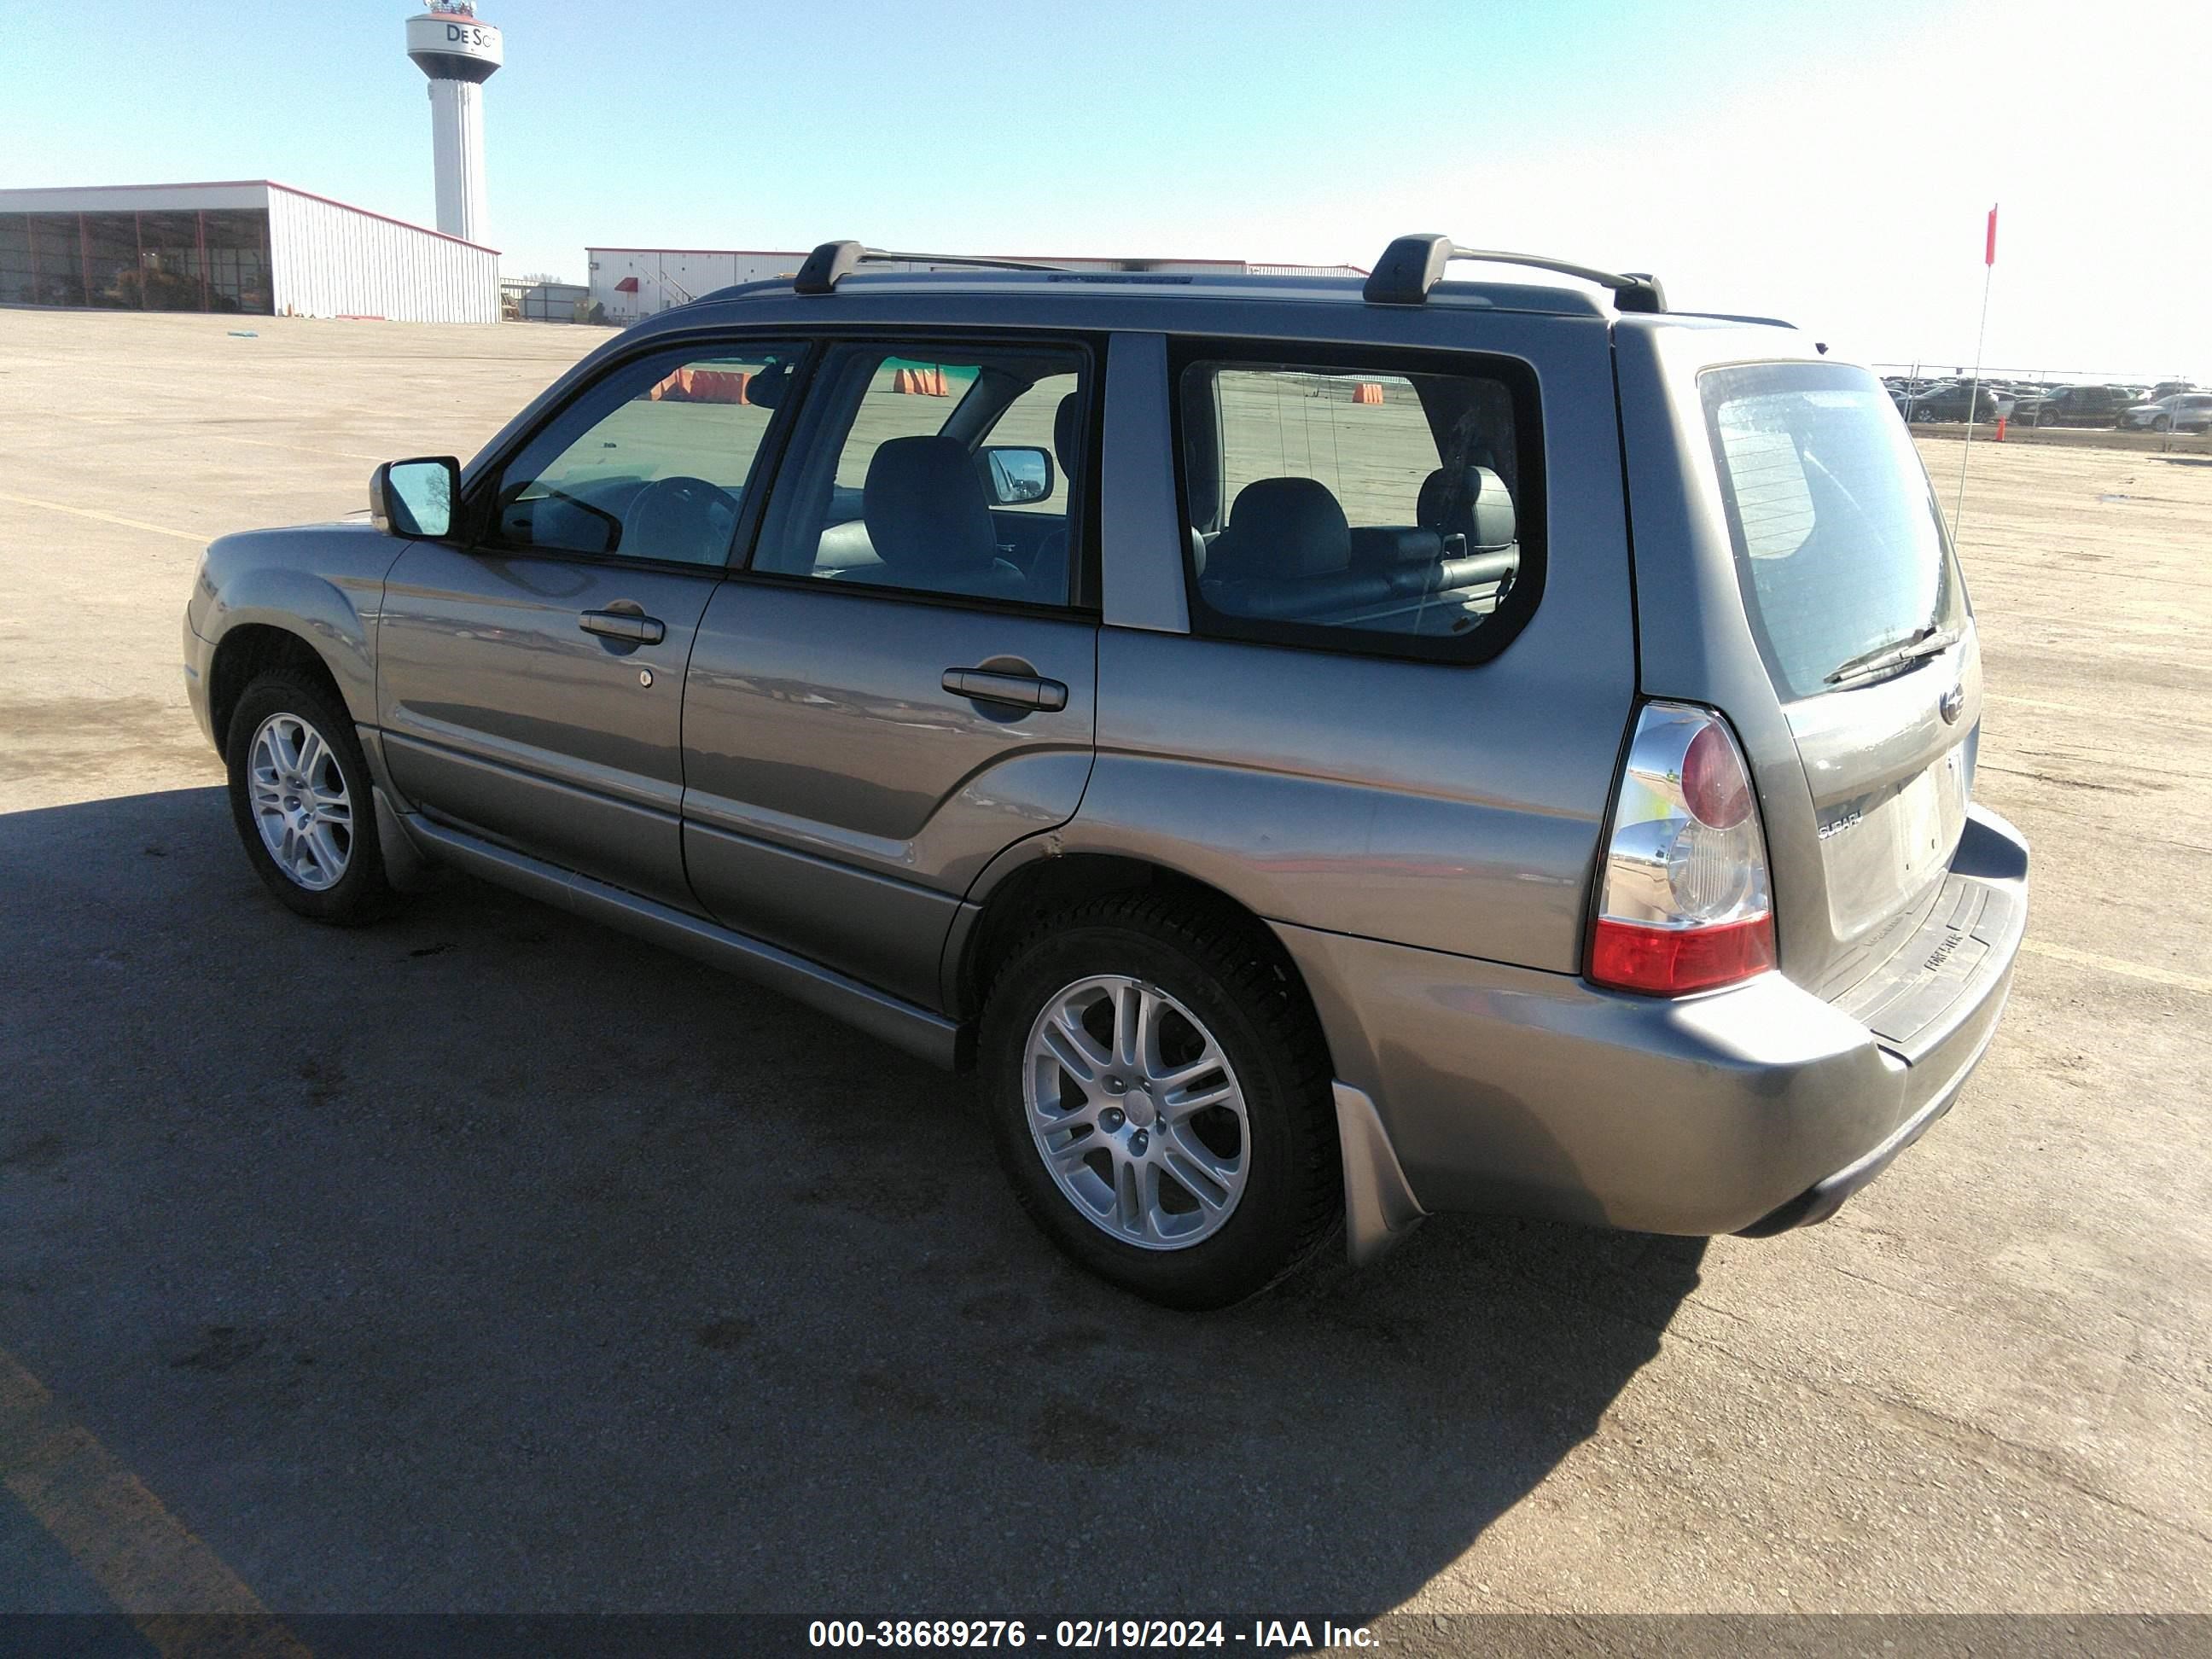 JF1SG69616H702911  - SUBARU FORESTER  2006 IMG - 2